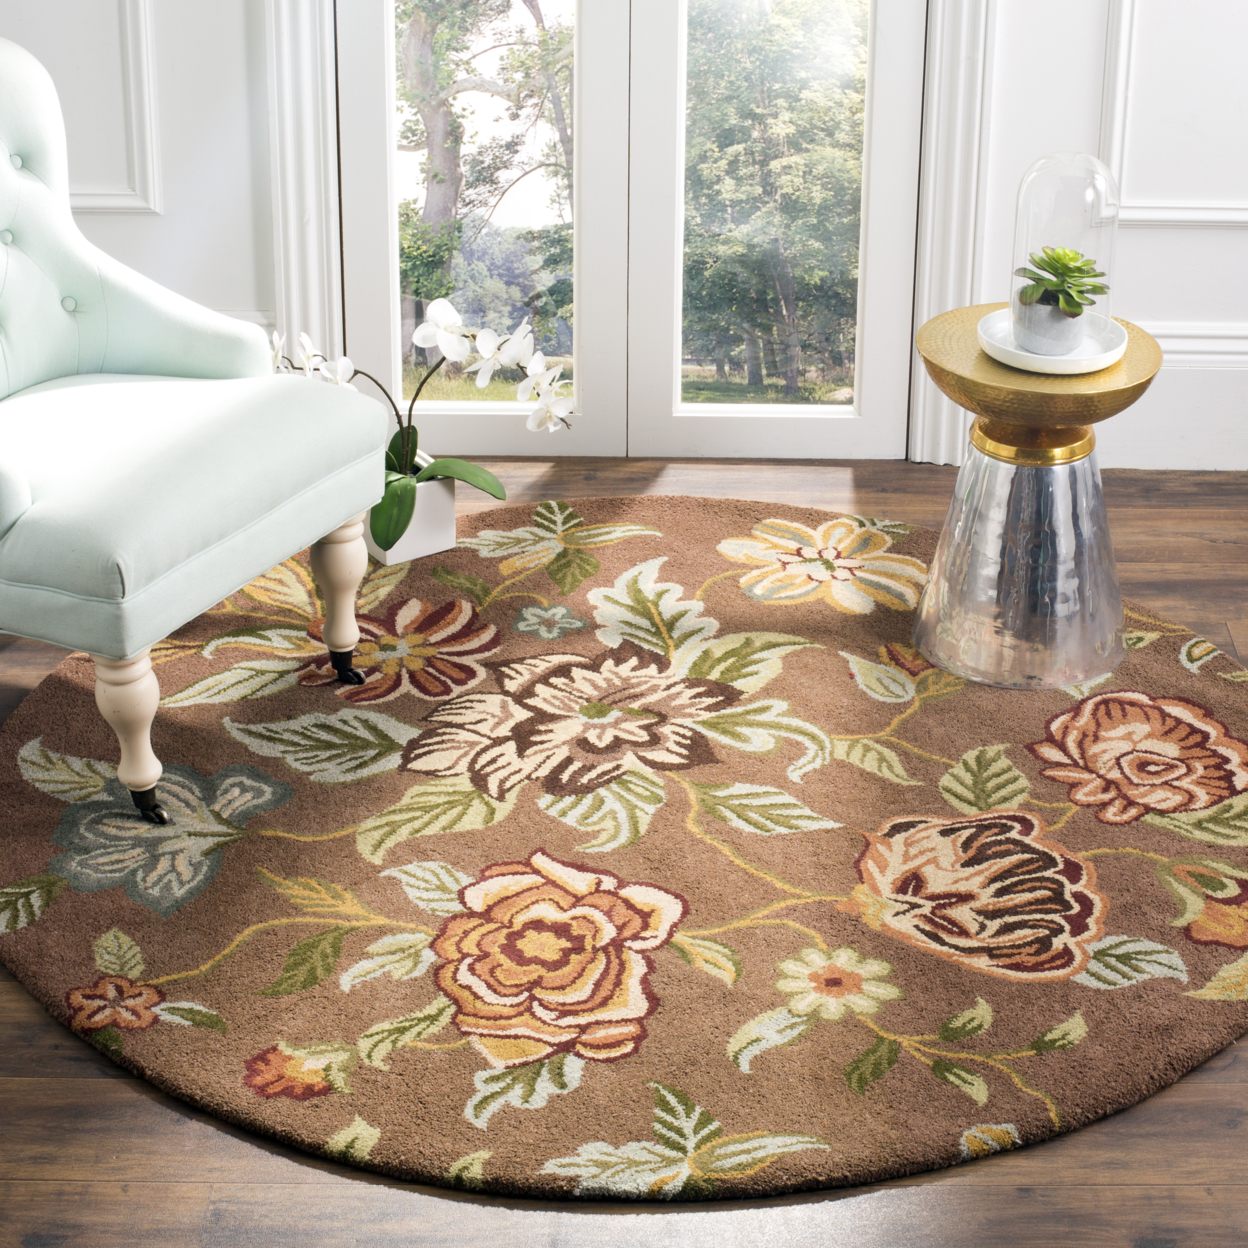 SAFAVIEH Blossom BLM920A Hand-hooked Brown / Multi Rug - 6' Square